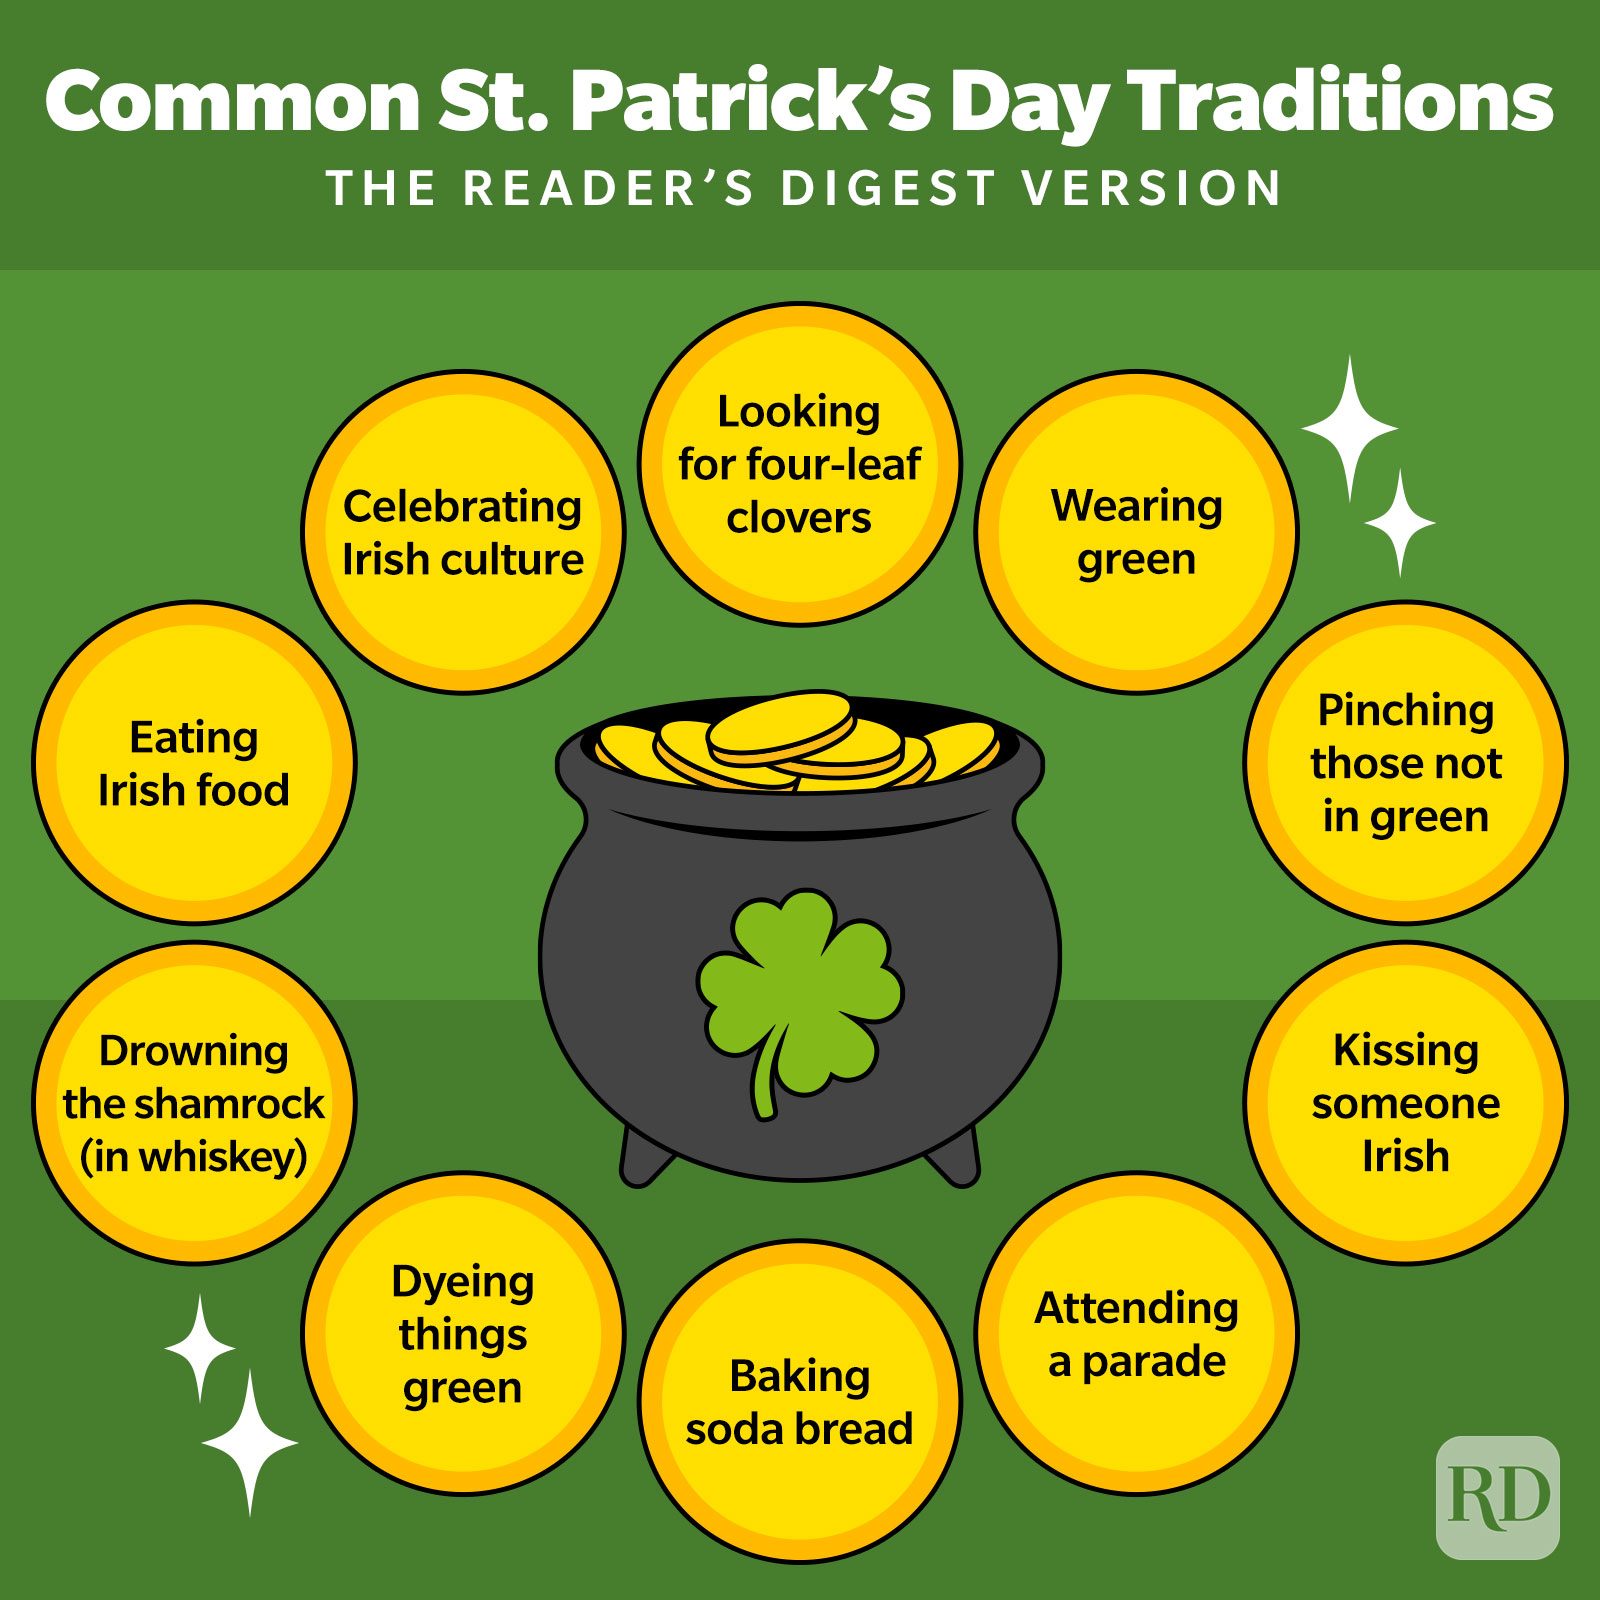 St. Paddy's or St. Patty's? The right nickname for St. Patrick's Day